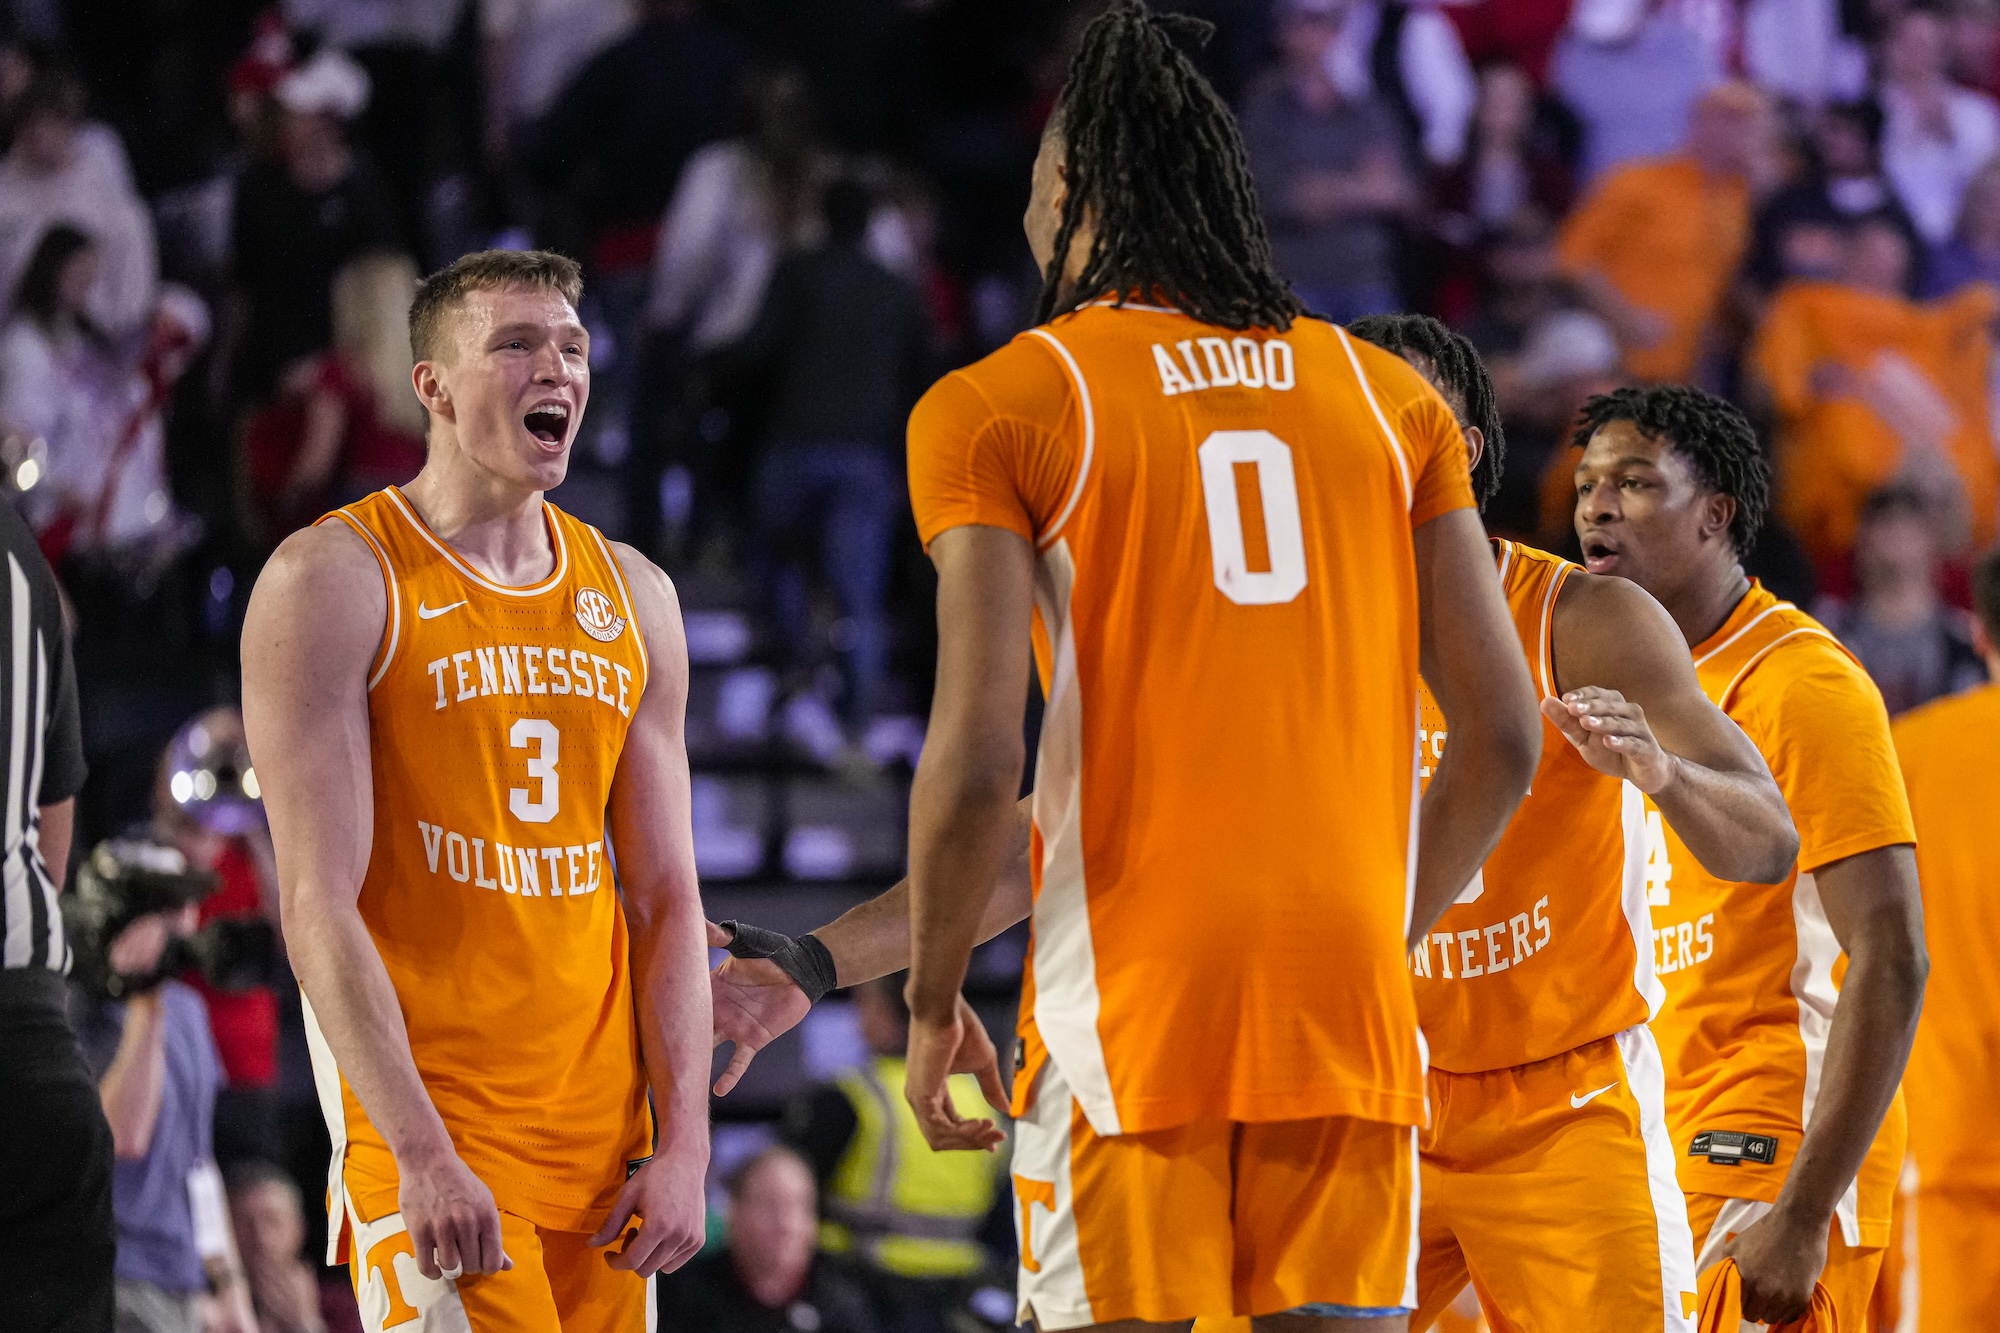 Knecht is averaging 20.1 points per game this season for Tennessee.